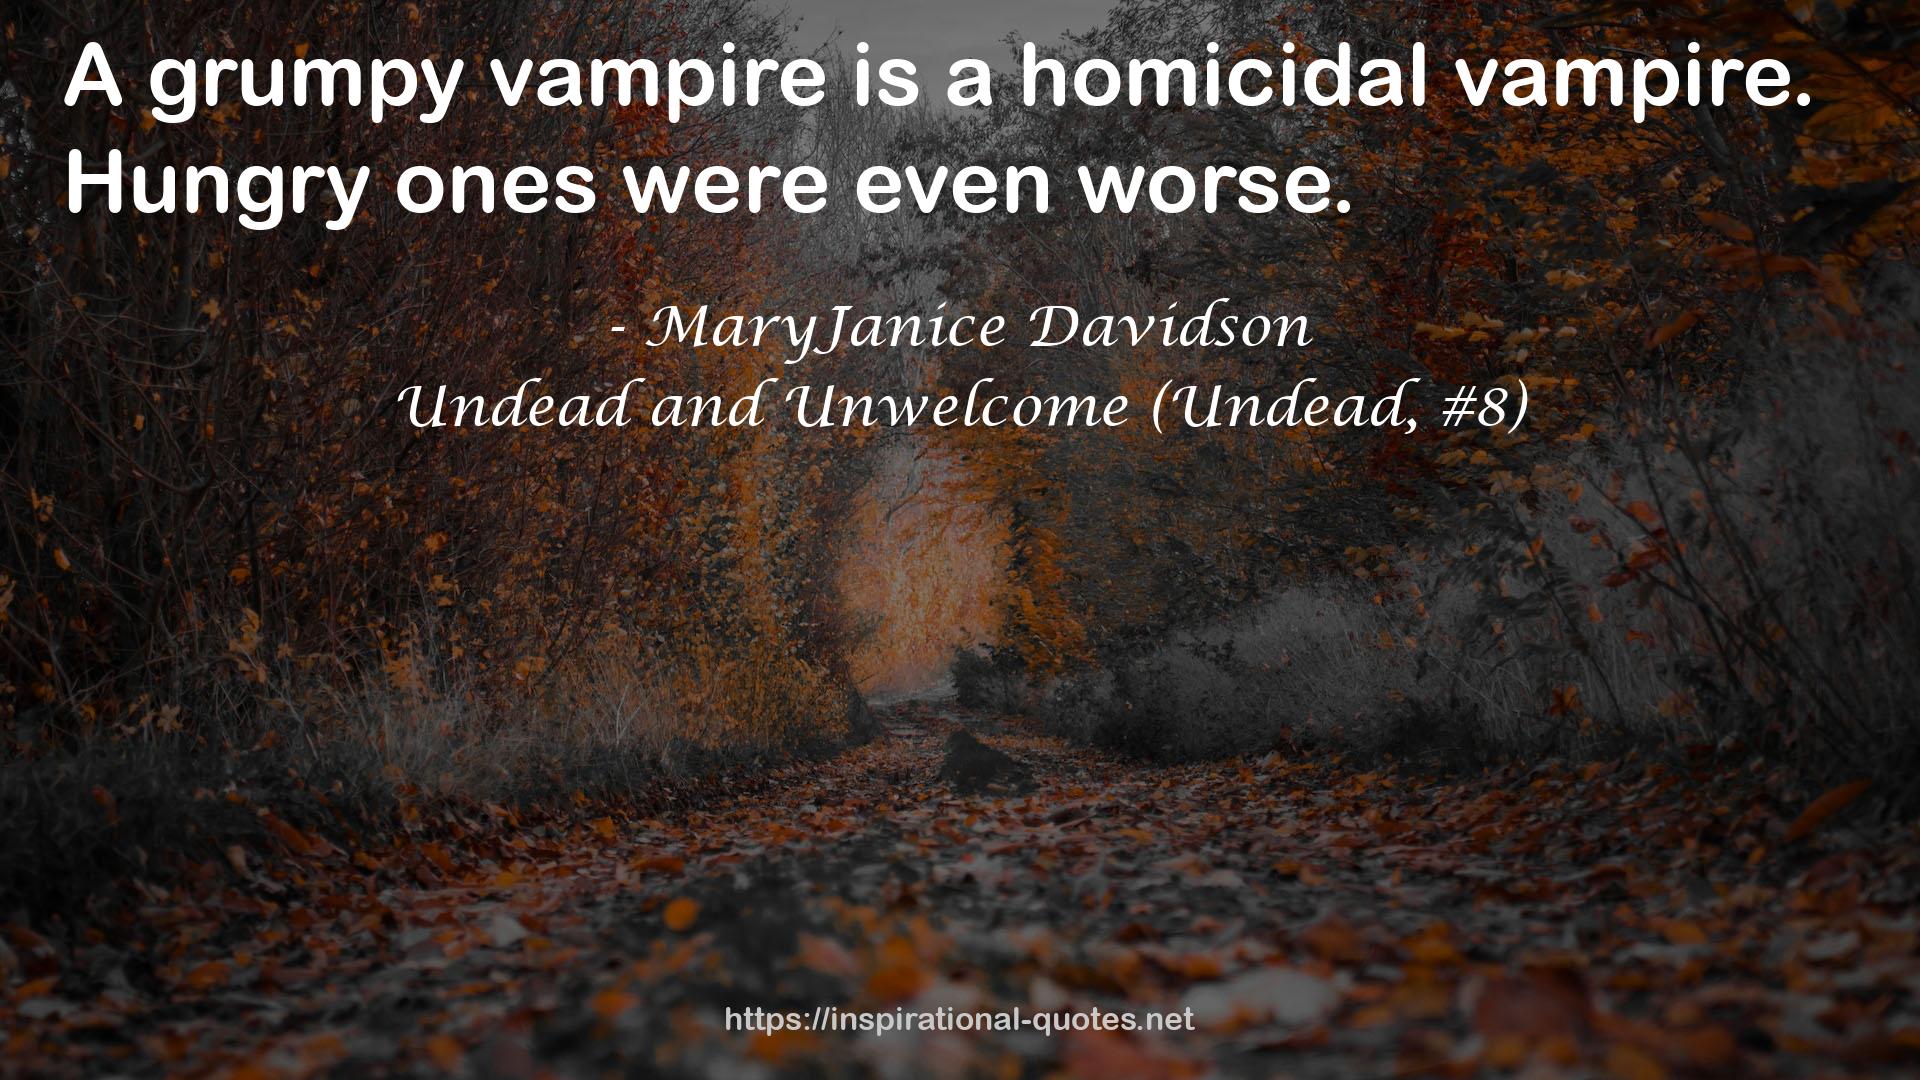 Undead and Unwelcome (Undead, #8) QUOTES